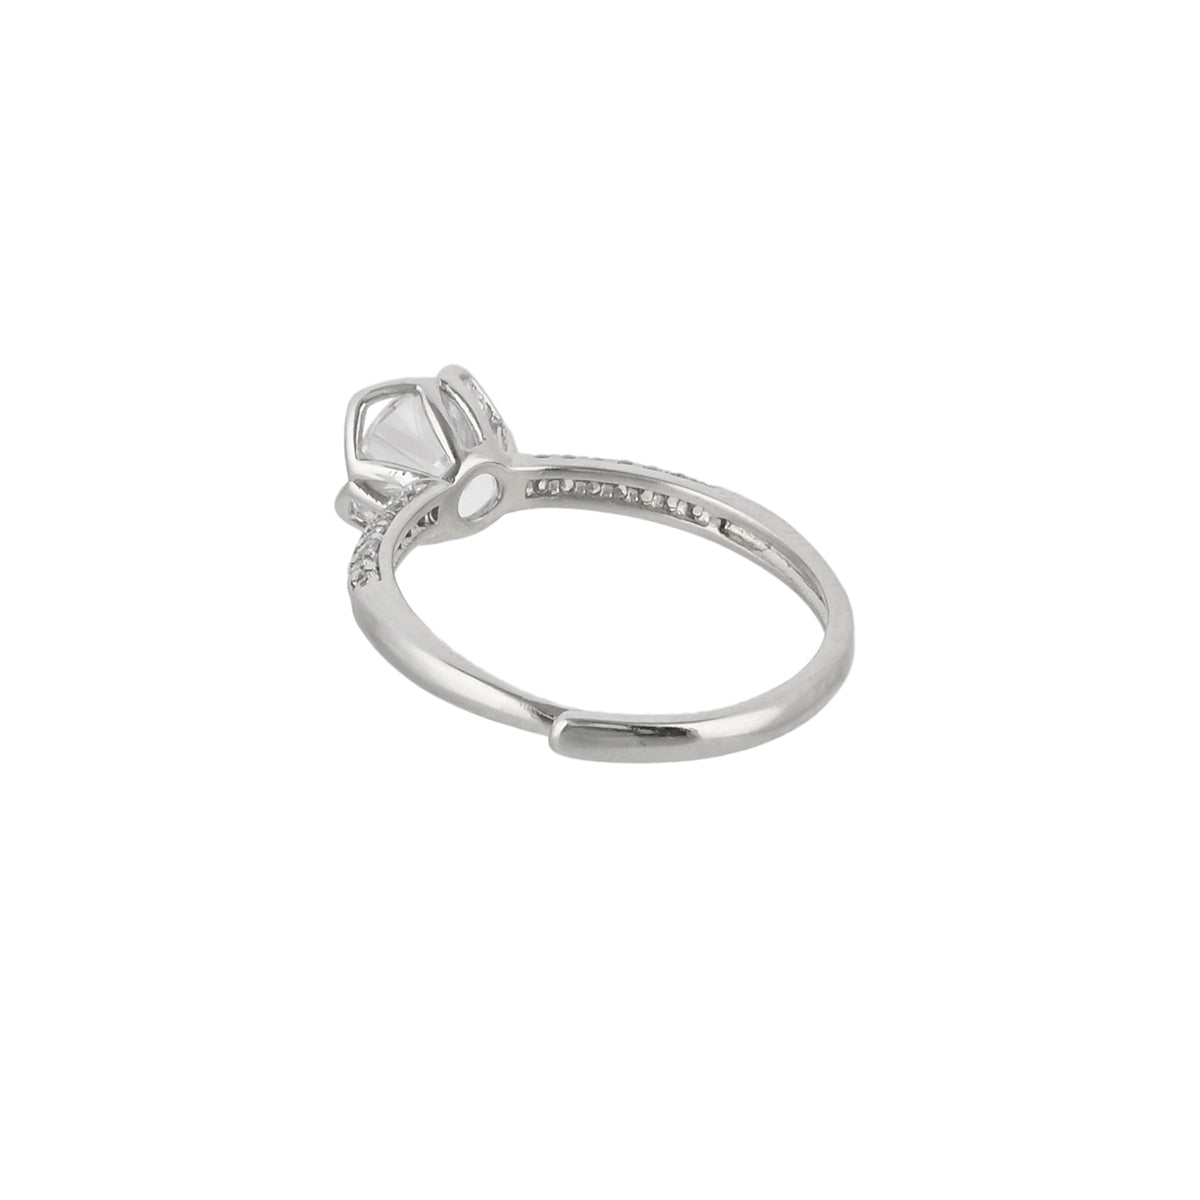 Silver Plated Round Cut Zircon Adorned Ring